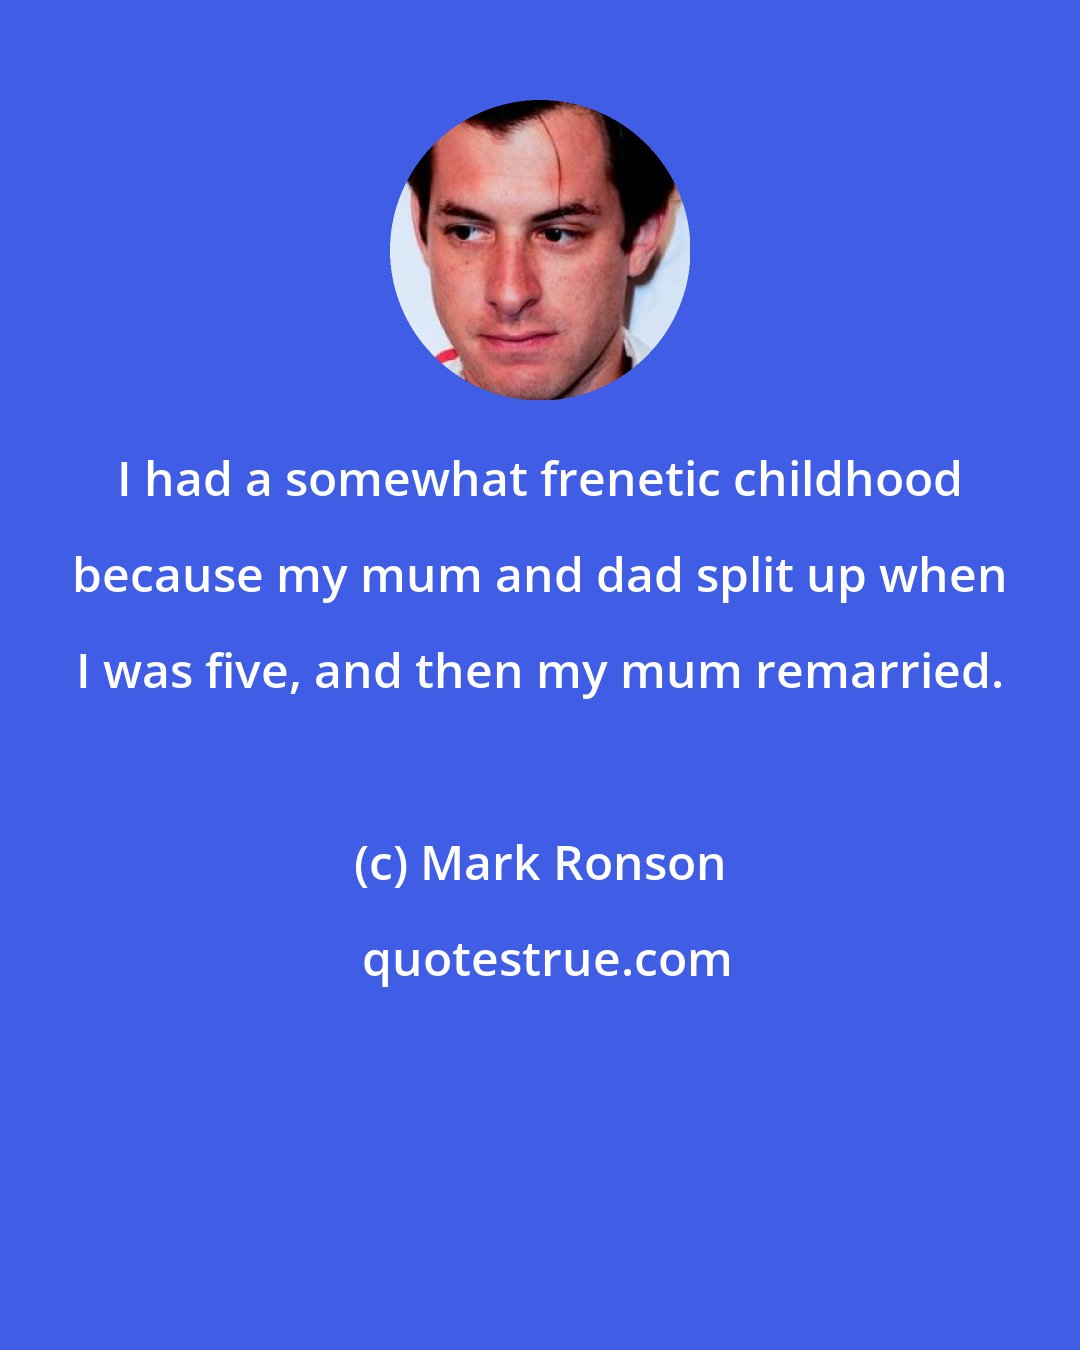 Mark Ronson: I had a somewhat frenetic childhood because my mum and dad split up when I was five, and then my mum remarried.